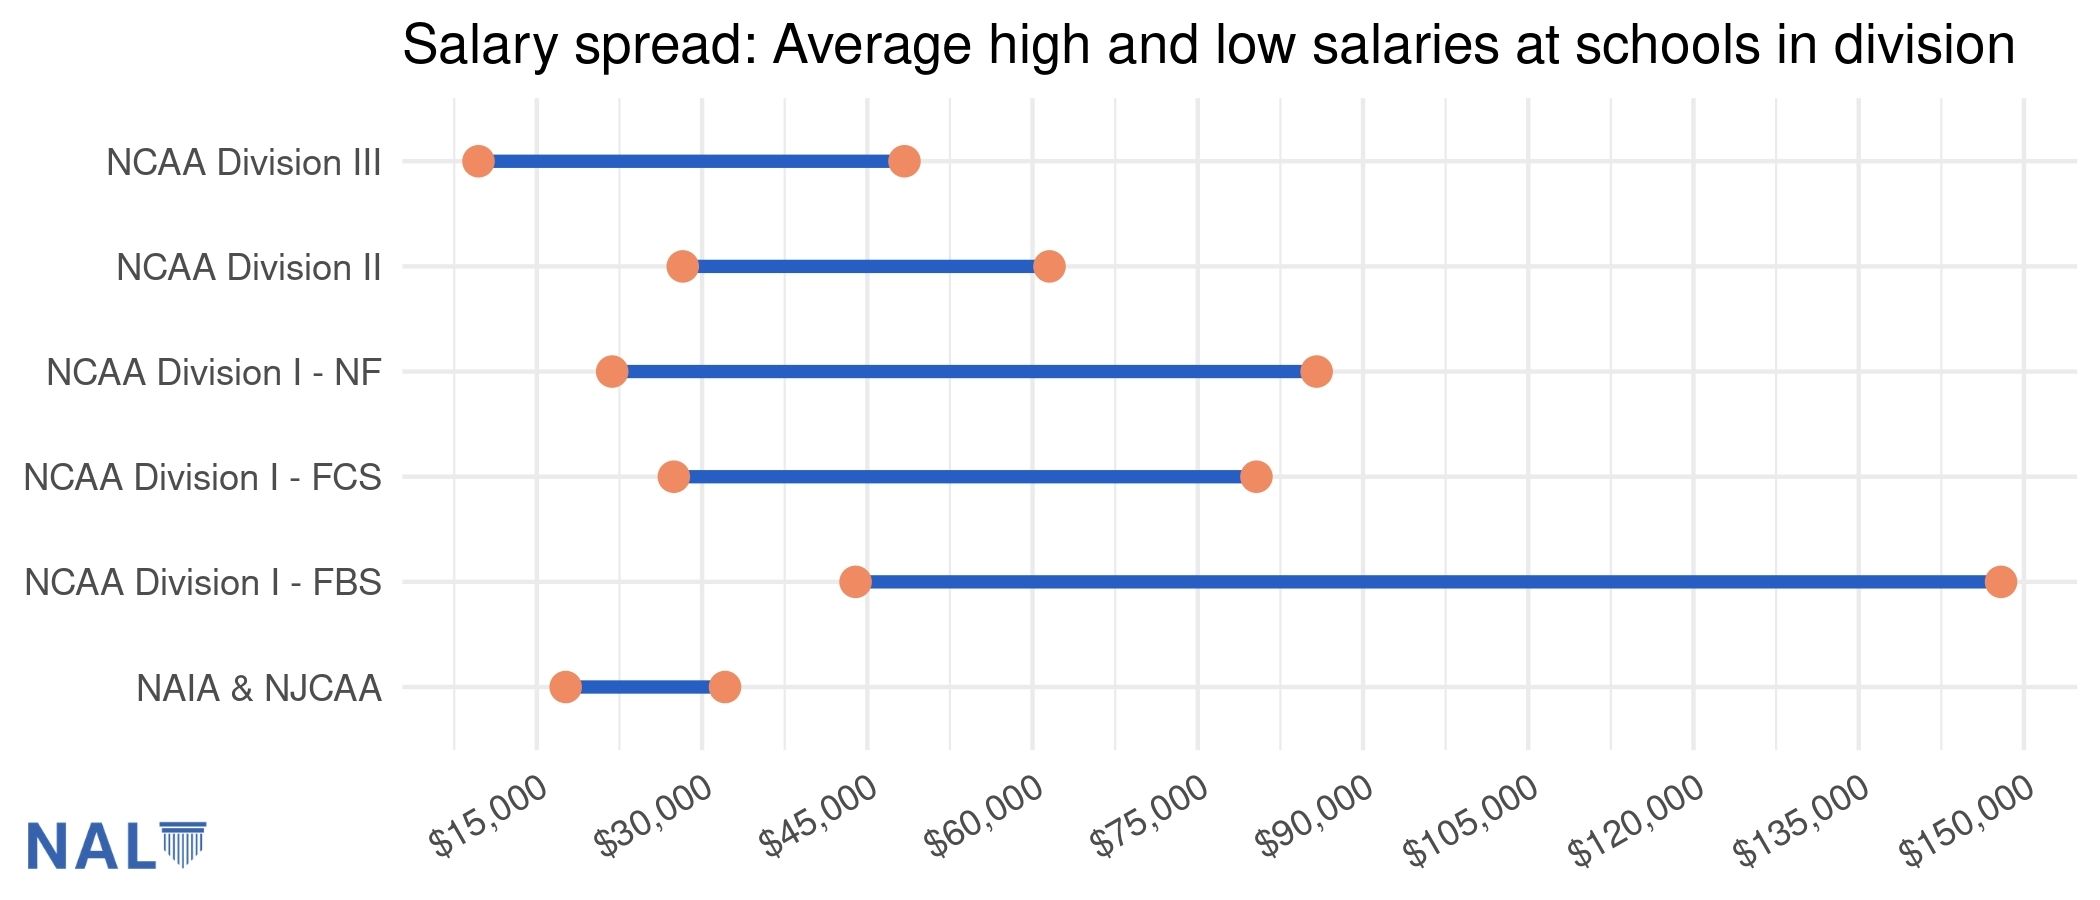 College track & field coaches: High and low average salaries